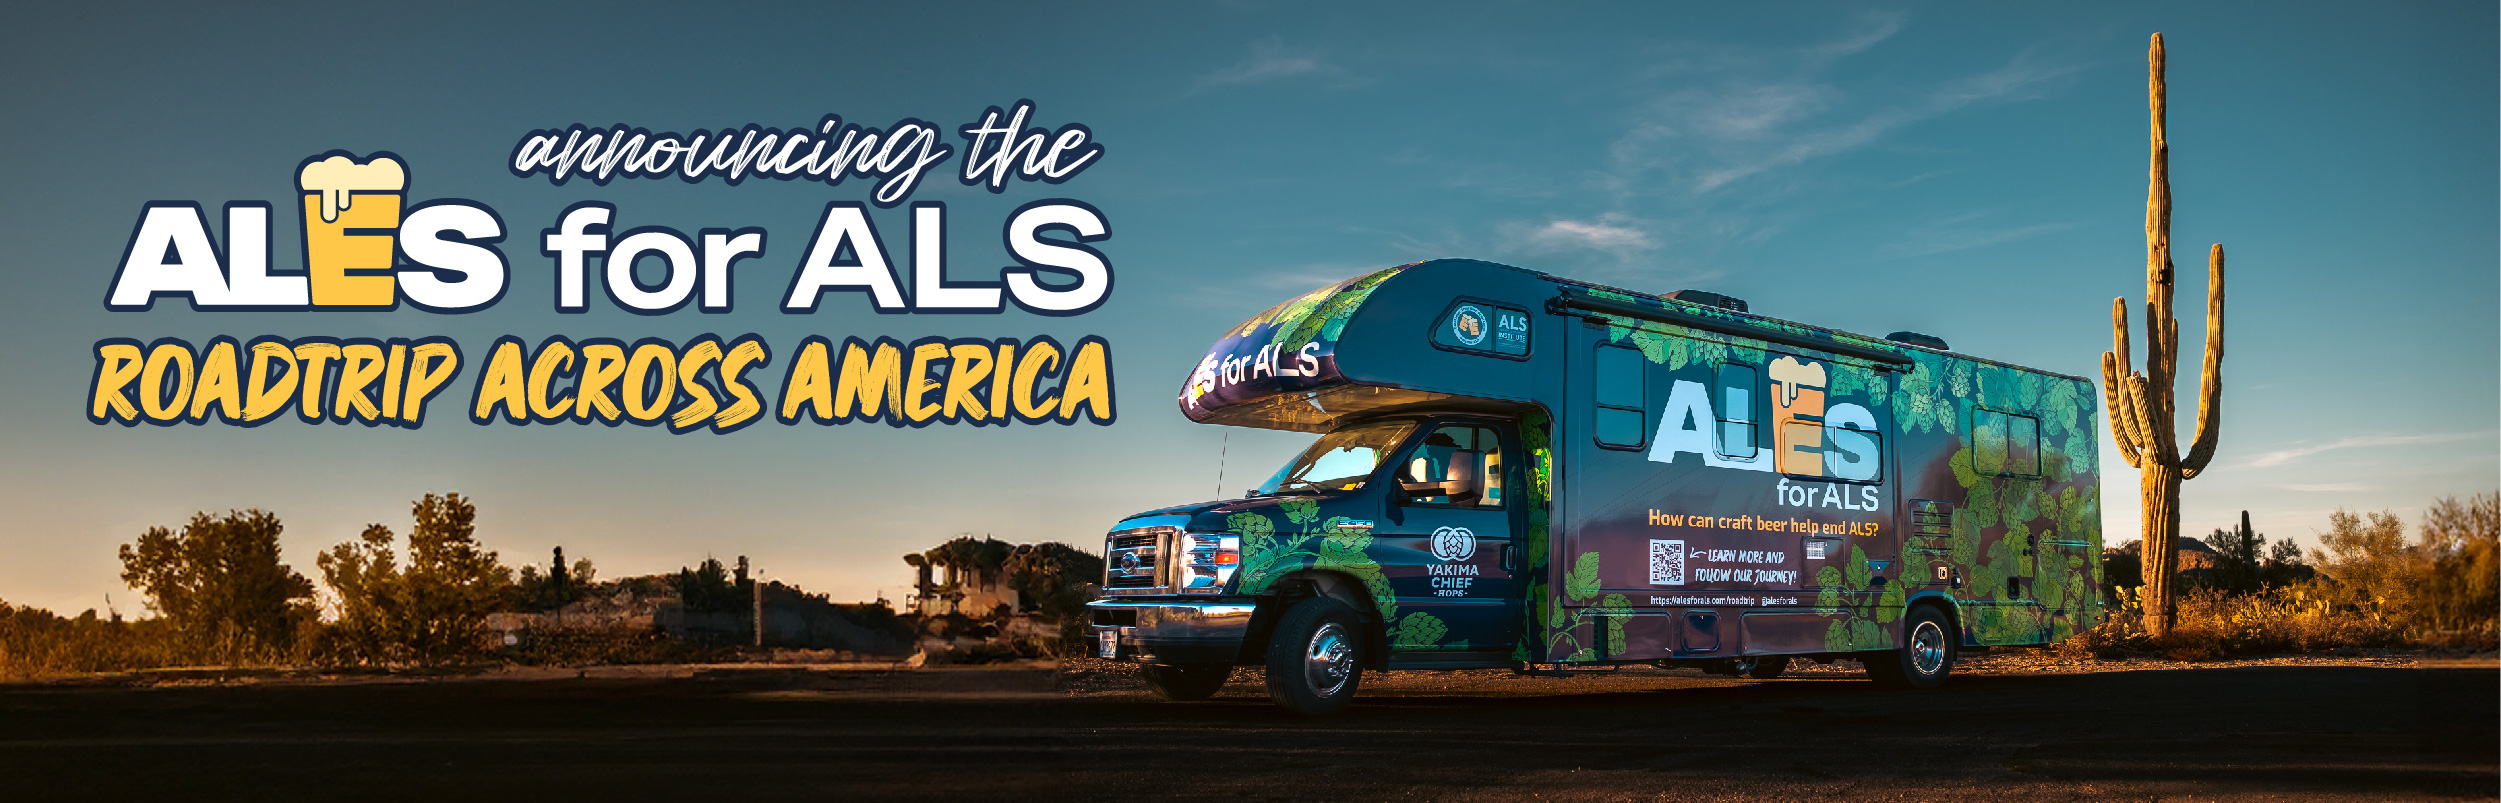 Announcing the Ales for ALS™ Roadtrip Across America